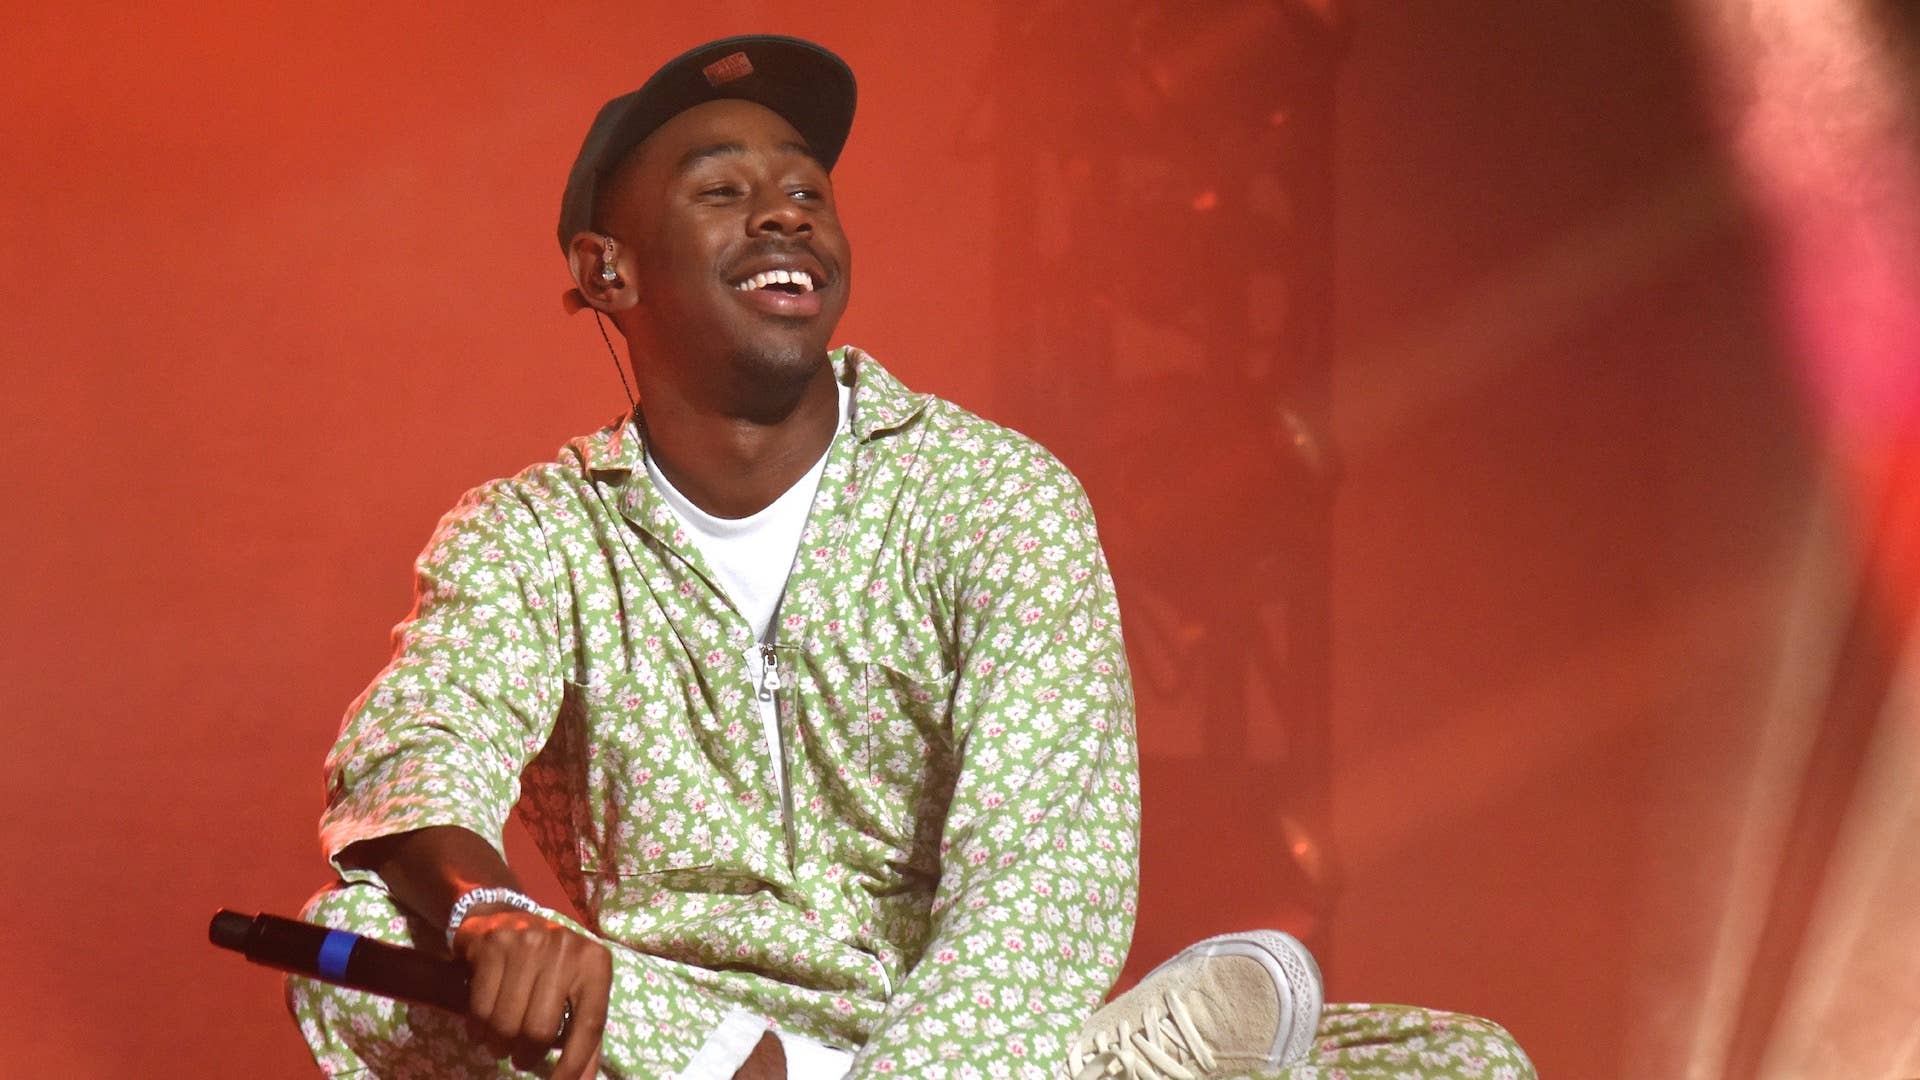 Tyler, The Creator performs during his "Flower Boy Tour"